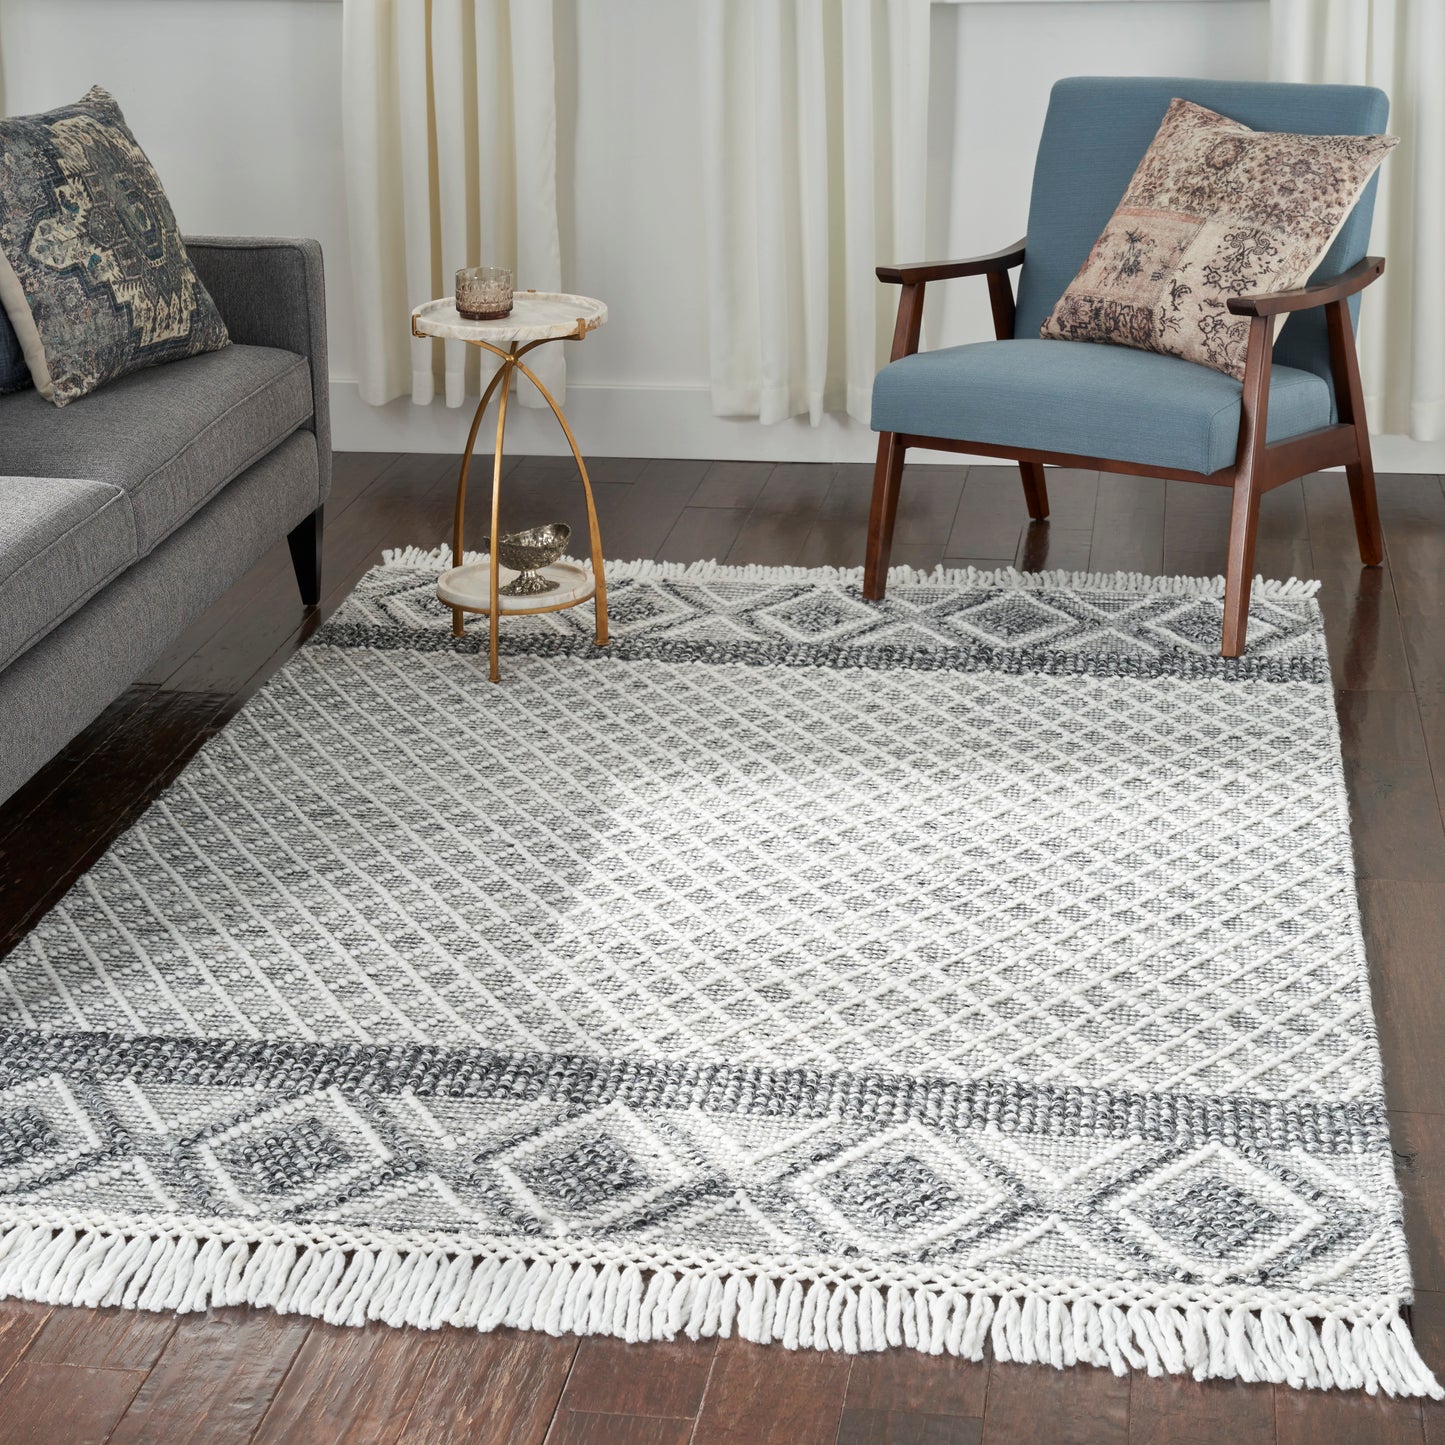 Nicole Curtis Series 3 SR303 Grey Ivory Contemporary Woven Rug